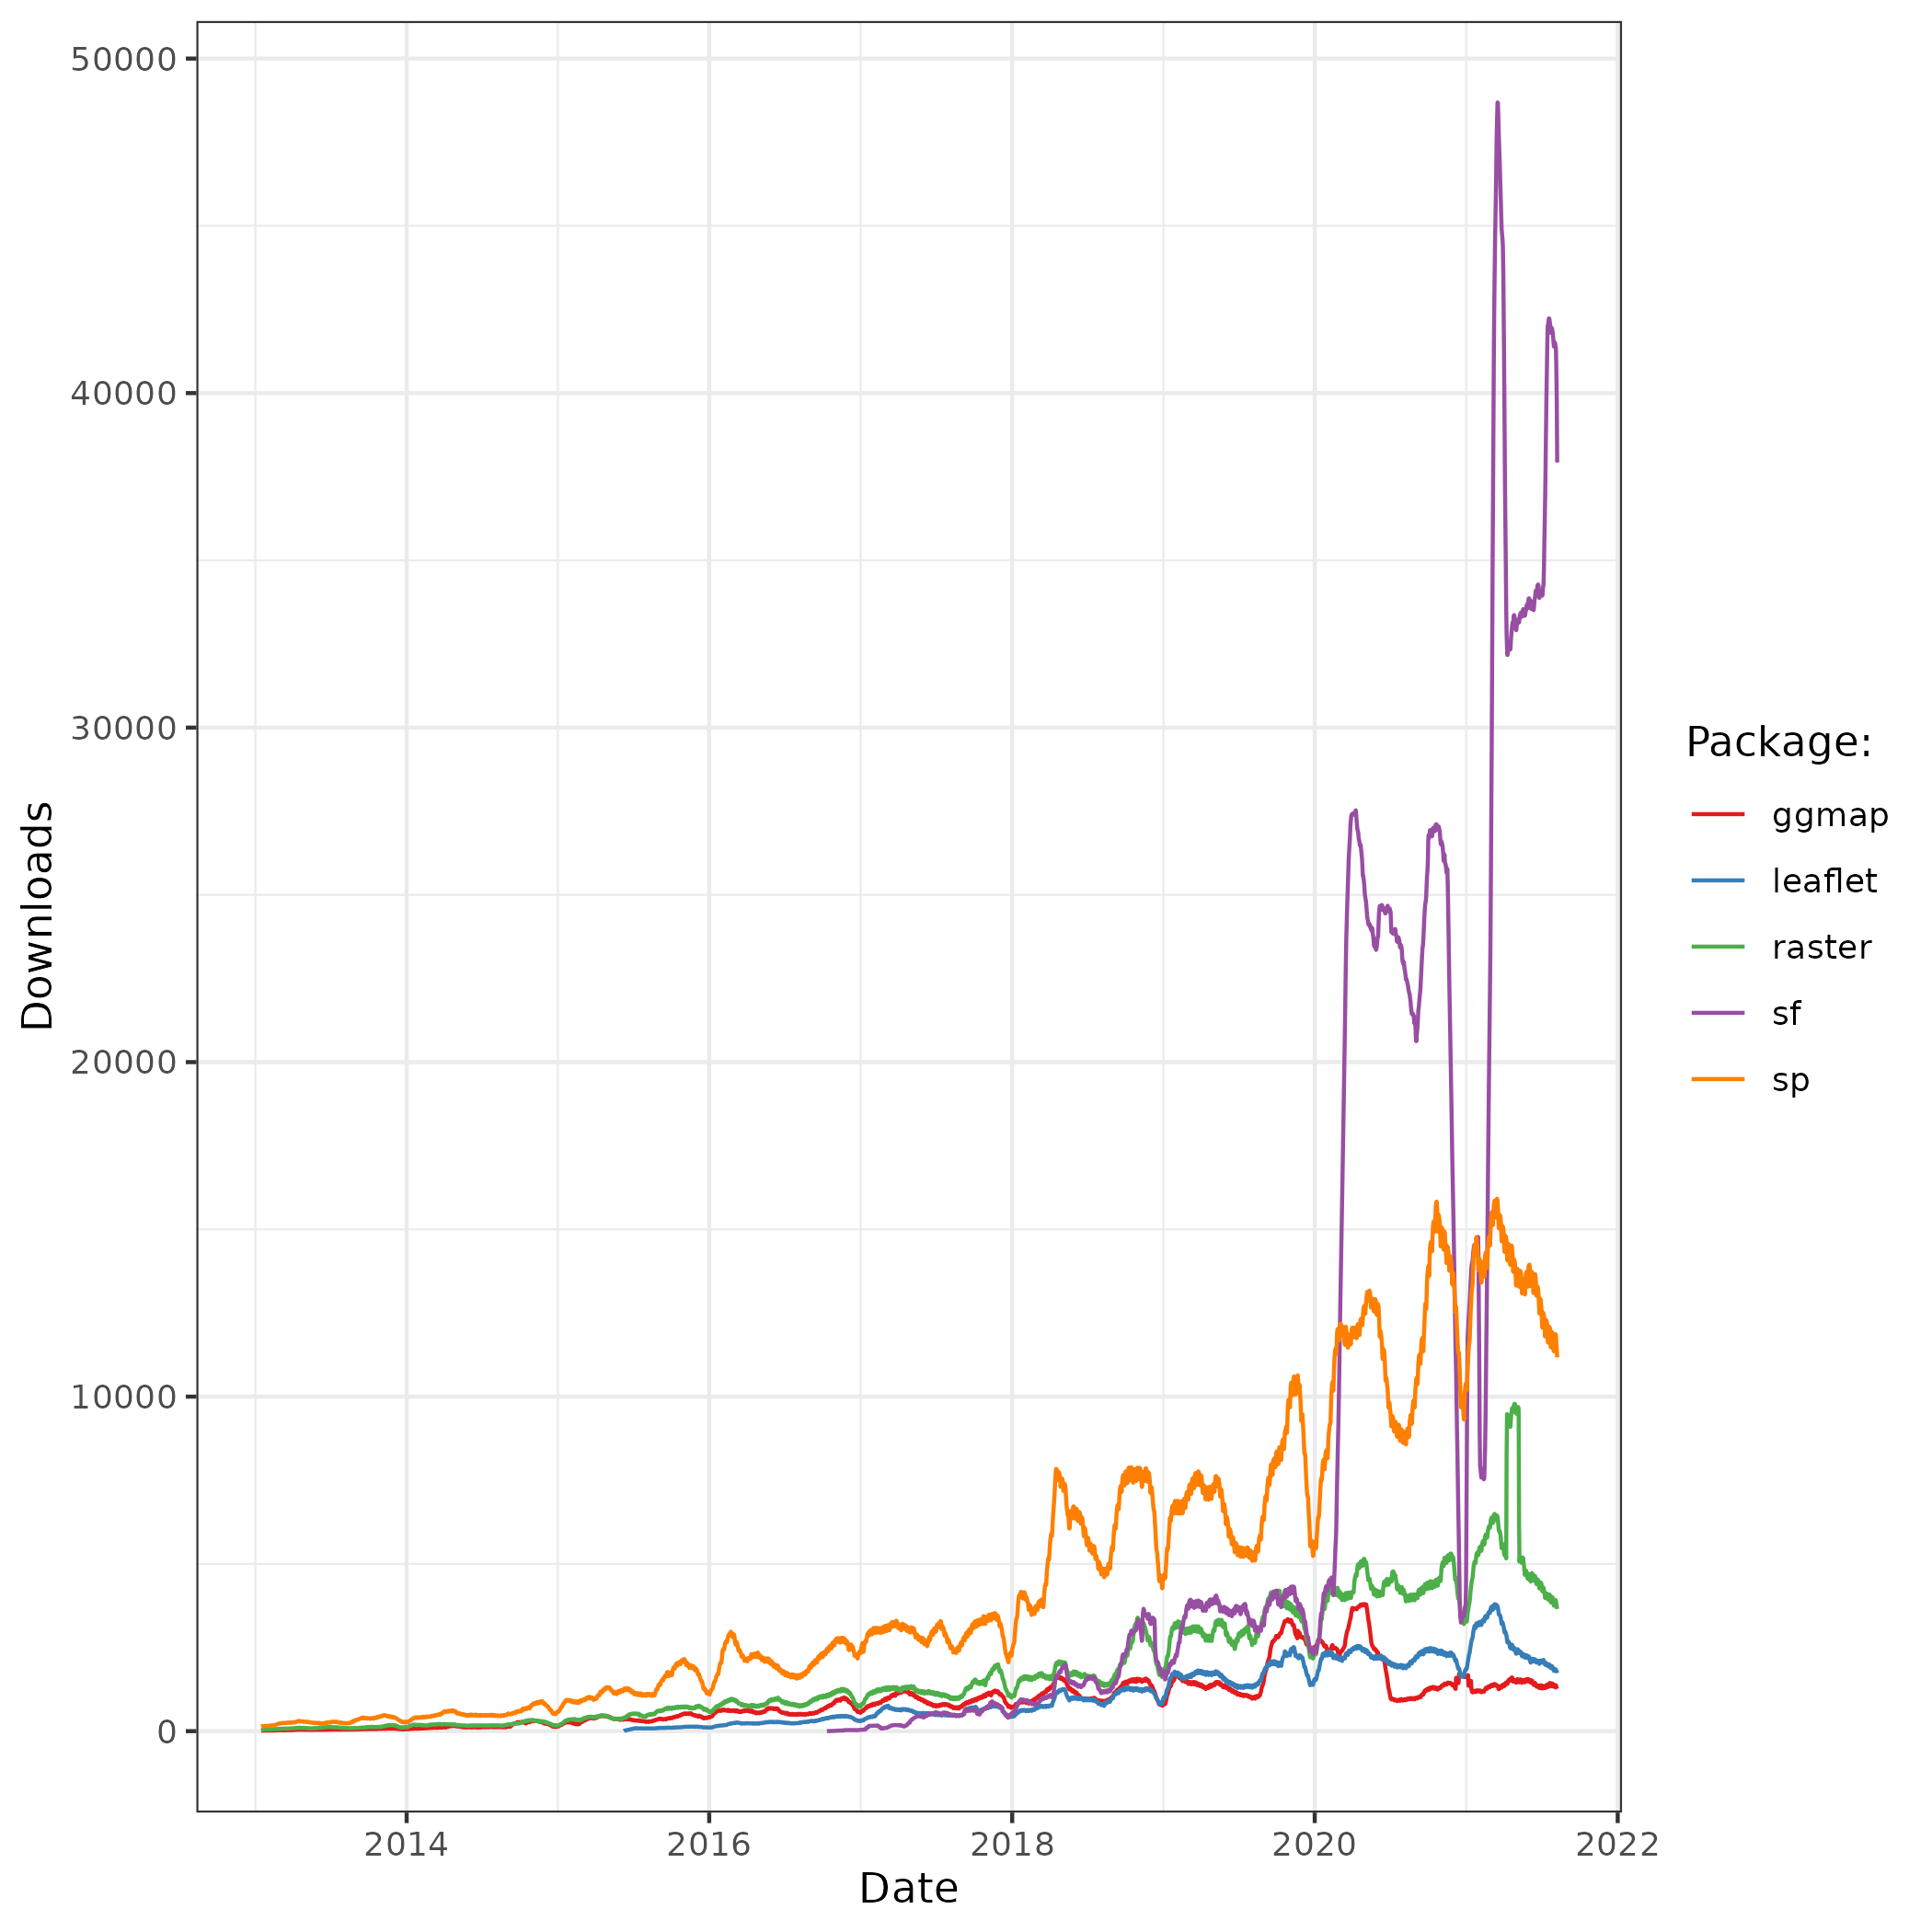 The popularity of spatial packages in R. The y-axis shows average number of downloads per day, within a 30-day rolling window, of prominent spatial packages.